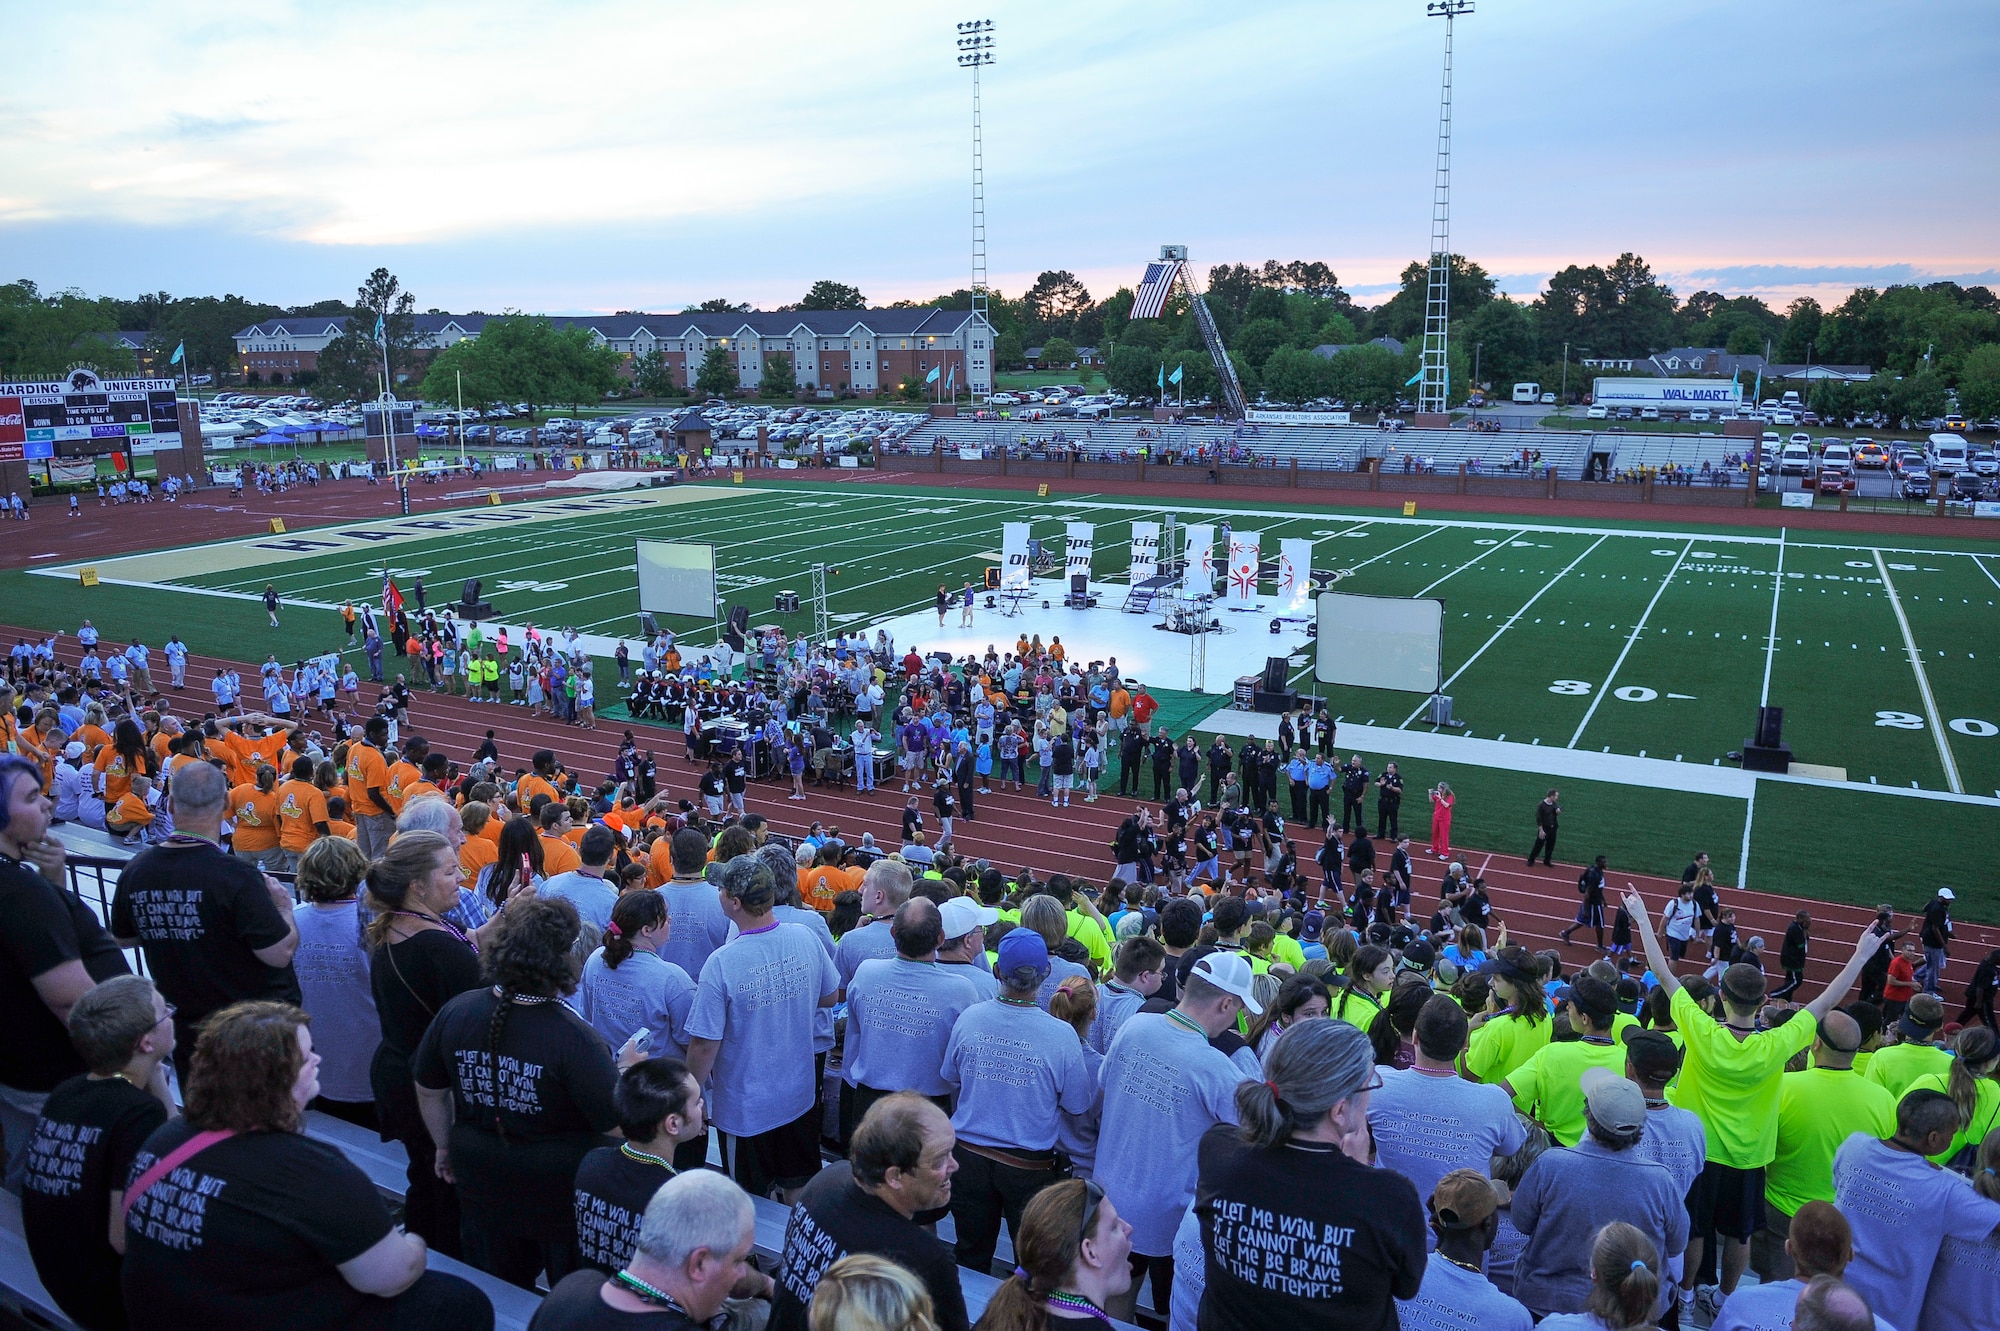 Competitors at the 2013 Arkansas Summer Special Olympics cheer during the games’ opening ceremonies May 23, 2013, at Harding University Football Stadium in Searcy, Ark. The three day event drew athletes from around the state to compete in events ranging from the 50 meter walk to flag football. (U.S. Air Force photo by Staff Sgt. Russ Scalf)